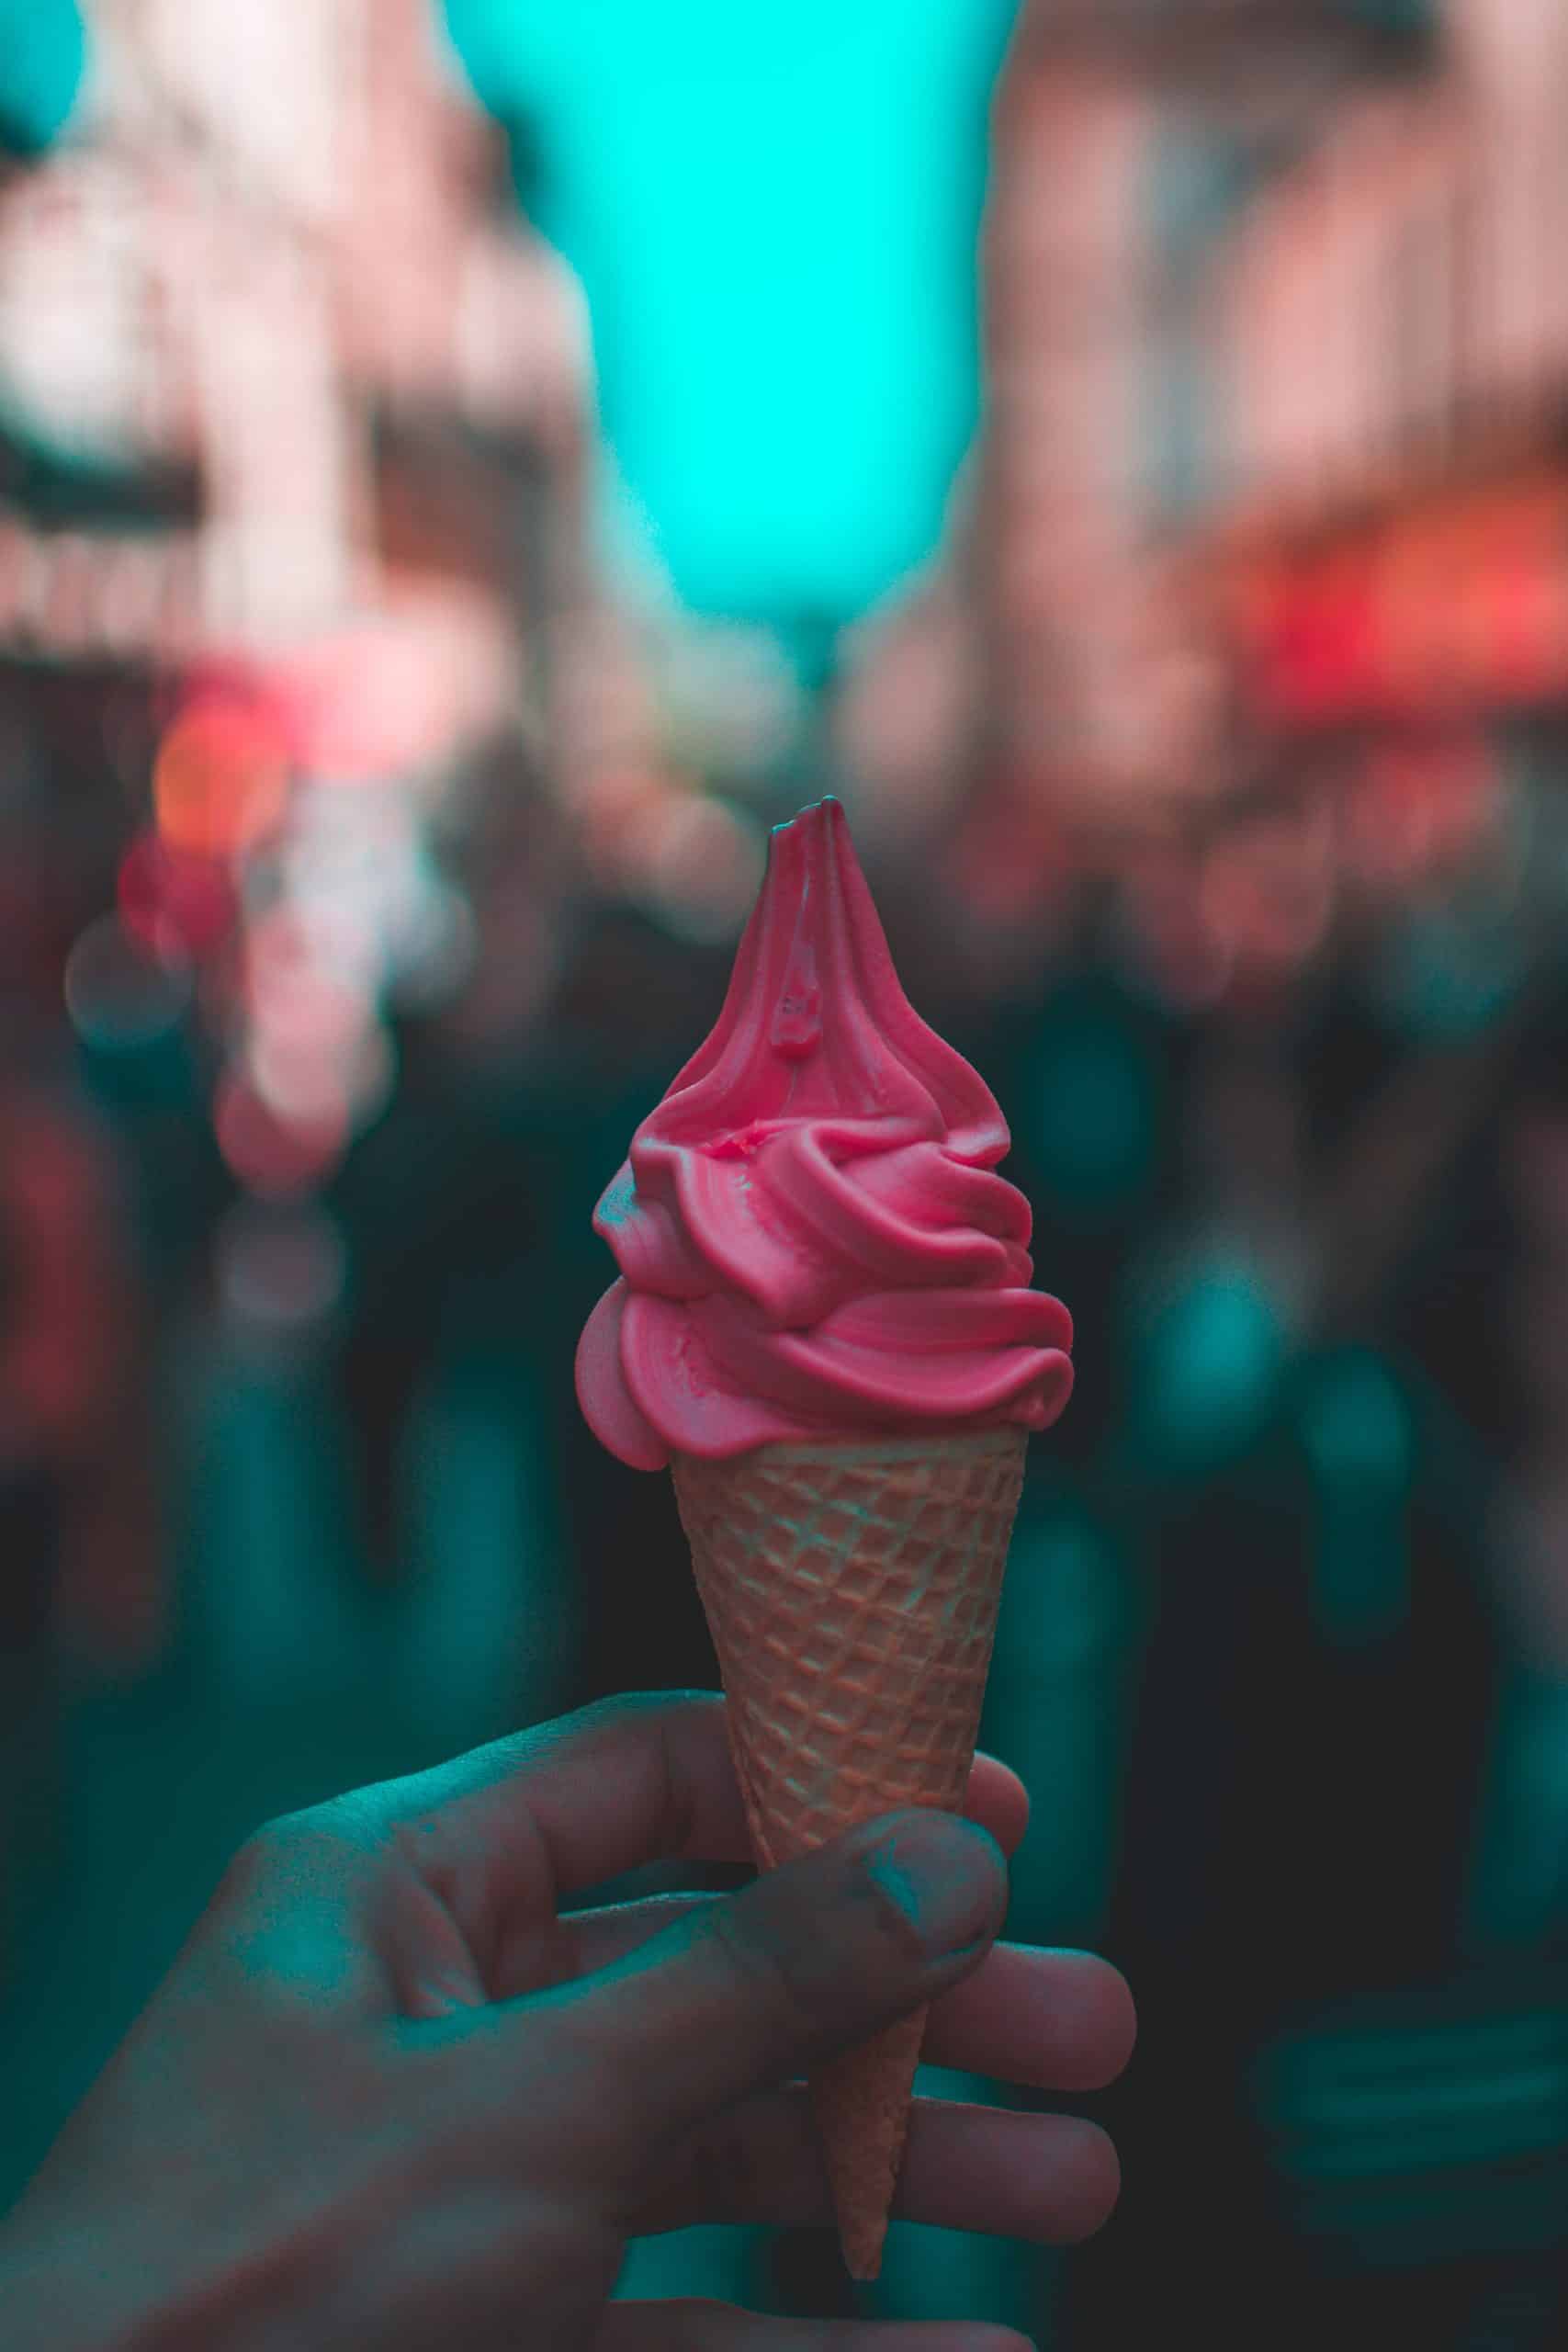 A hand holding a bright pink coloured ice cream against a blurred city background